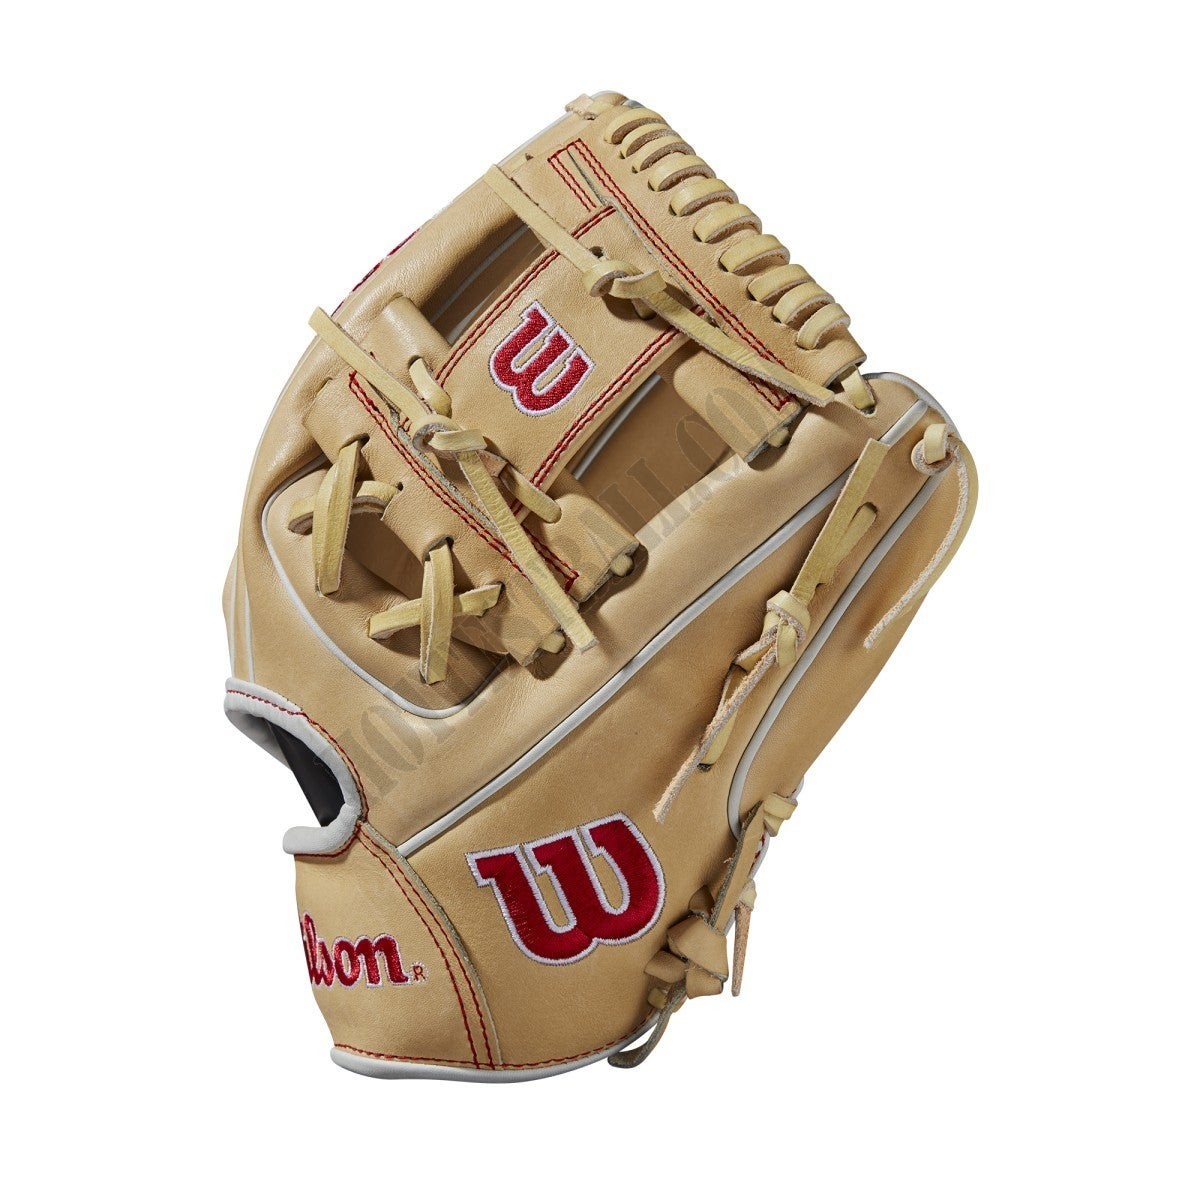 2021 A2000 1786 Bronco 11.5" Infield Baseball Glove - Right Hand Throw ● Wilson Promotions - -3